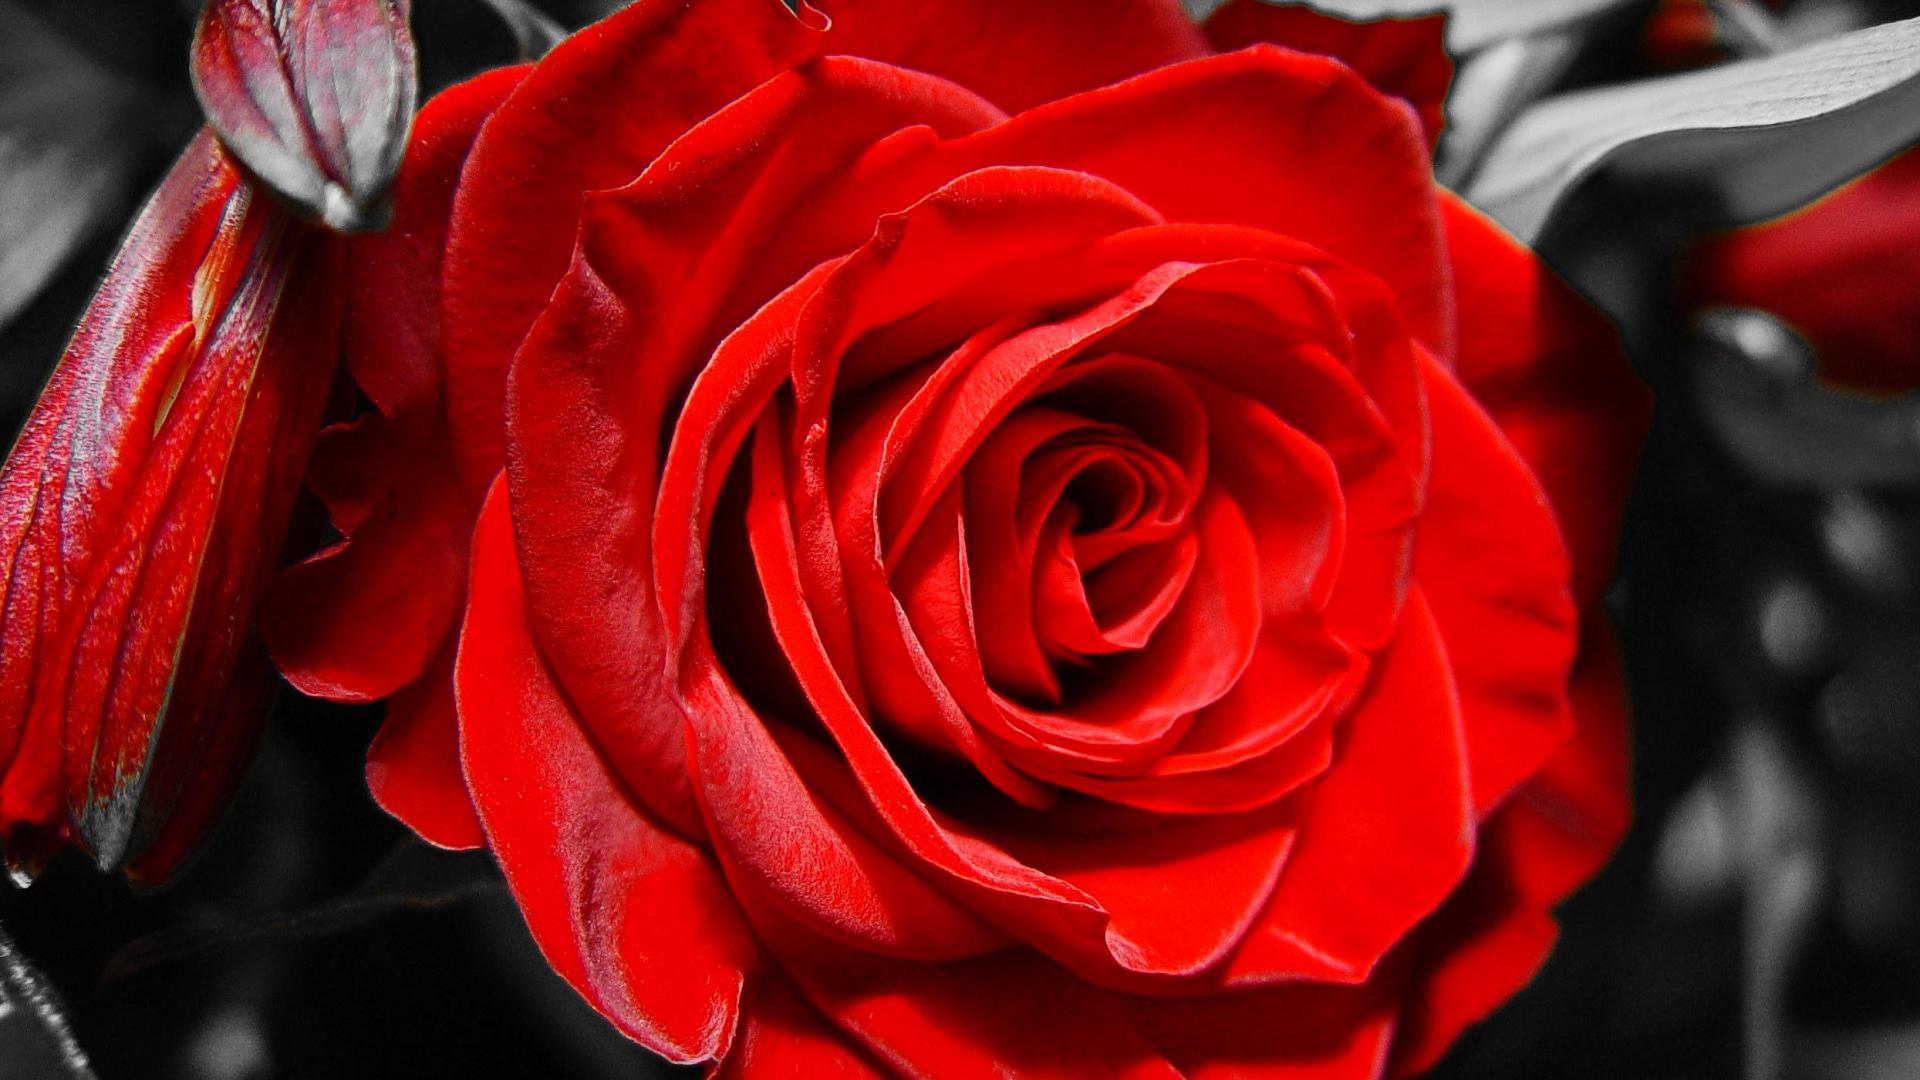 Red rose on black and white background on March 8 wallpapers and